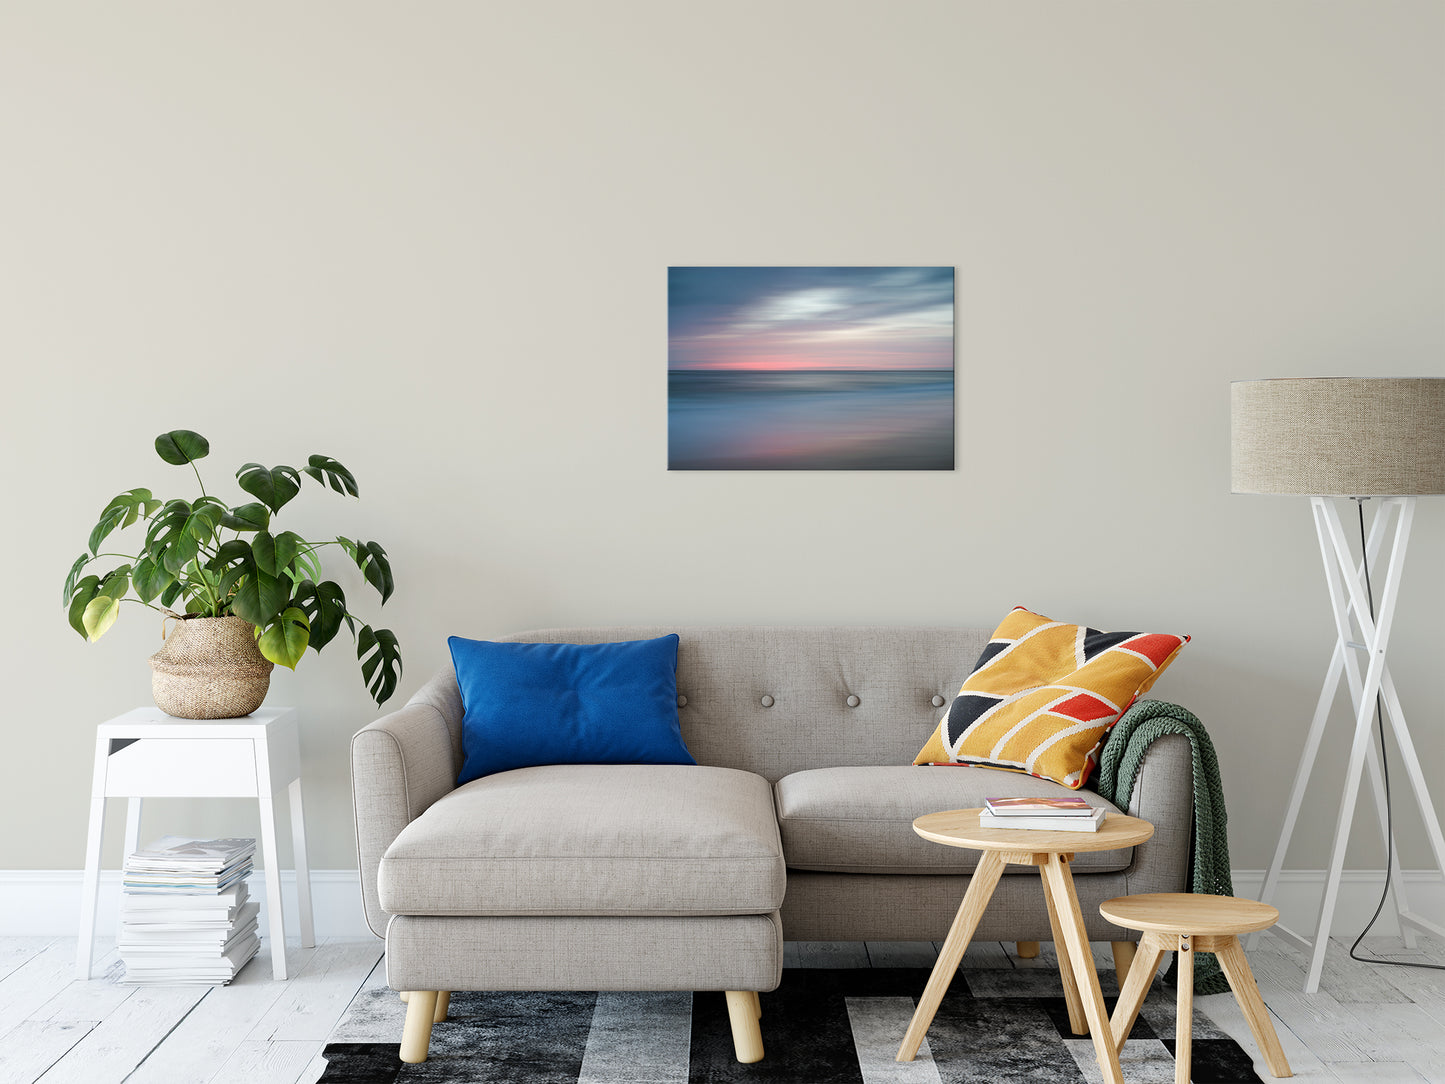 Pink and Blue Beach - Ocean - Coastal Abstract Landscape Fine Art Canvas Wall Art Prints - The Colors of Evening 20" x 30" - PIPAFINEART